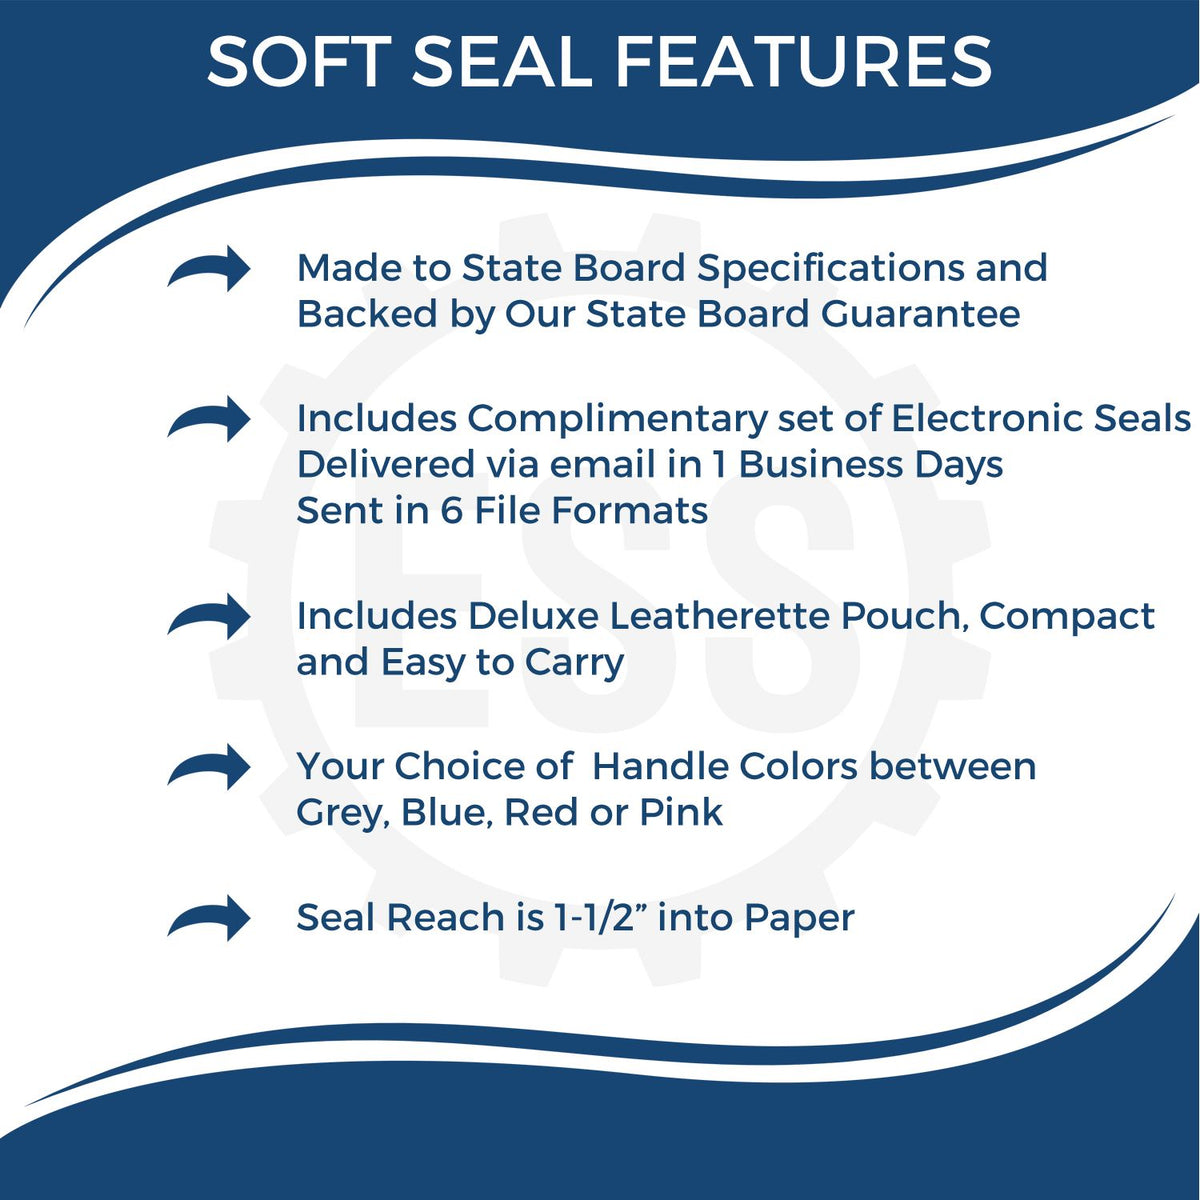 A picture of an infographic highlighting the selling points for the Soft Virginia Professional Engineer Seal